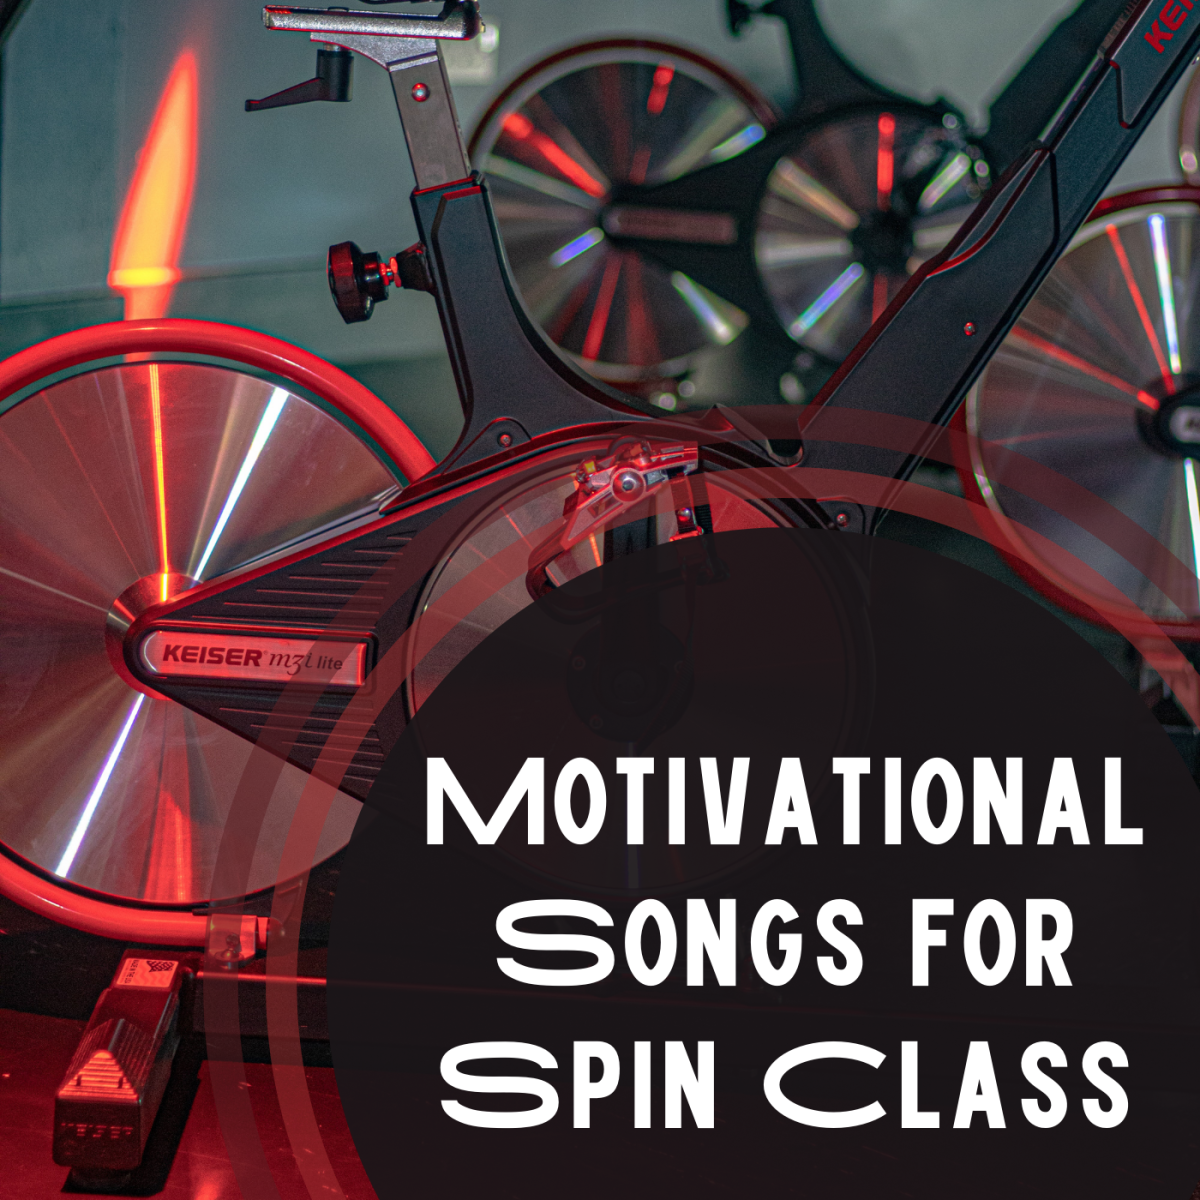 Get your heart pumping as you cycle to these inspirational songs!